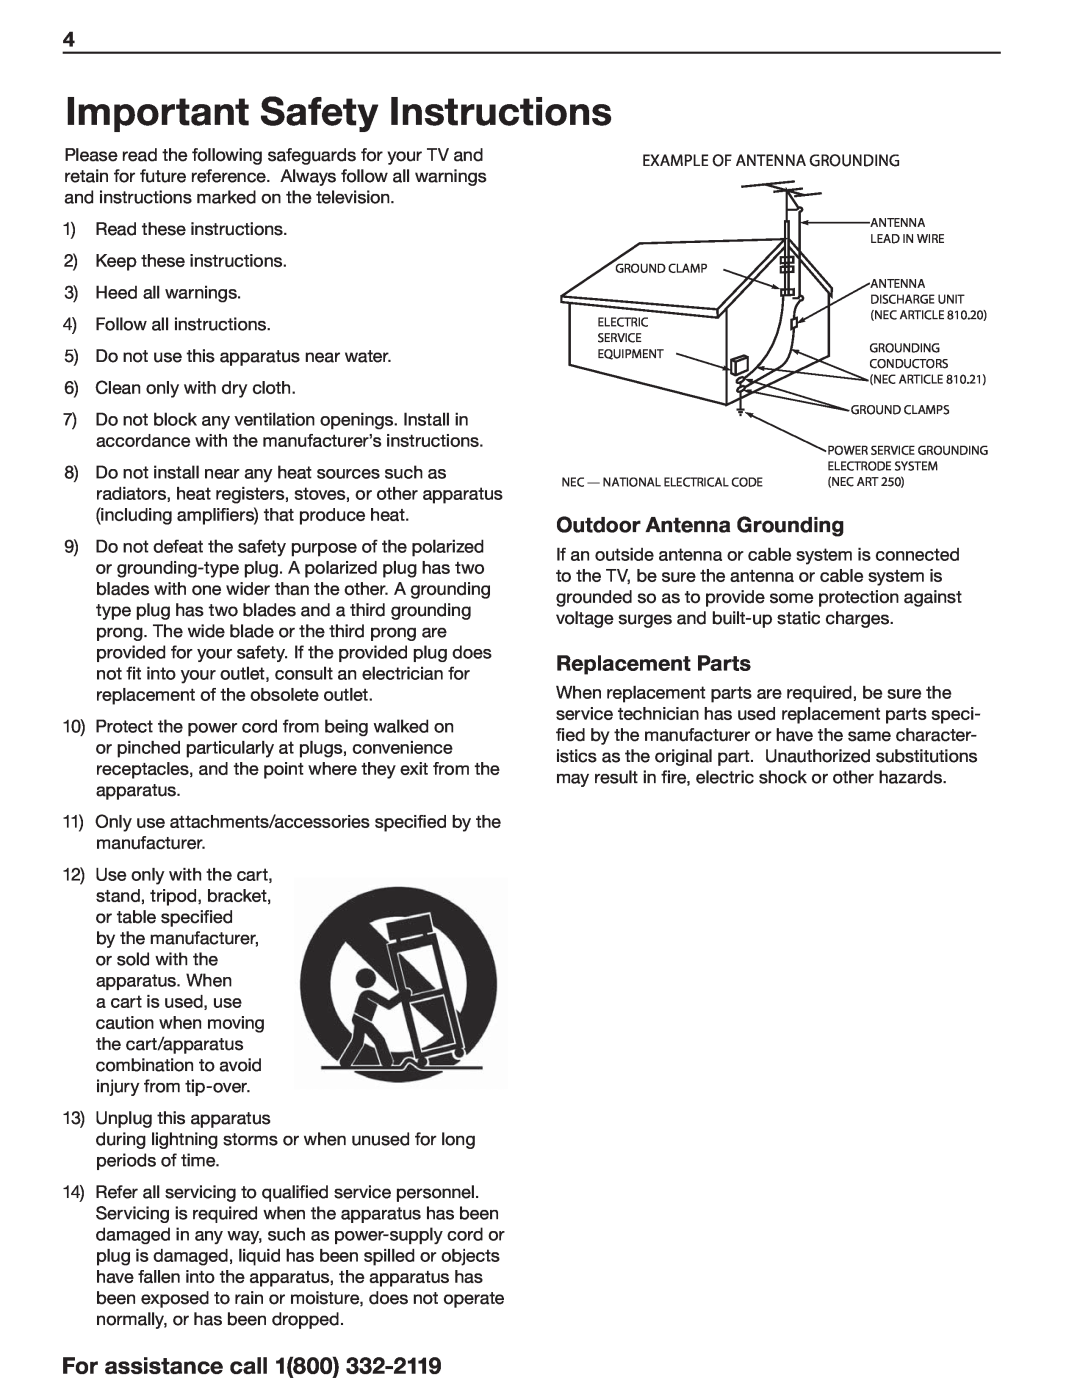 Mitsubishi Electronics WD-73CA1, WD-73C11 Important Safety Instructions, For assistance call, Outdoor Antenna Grounding 